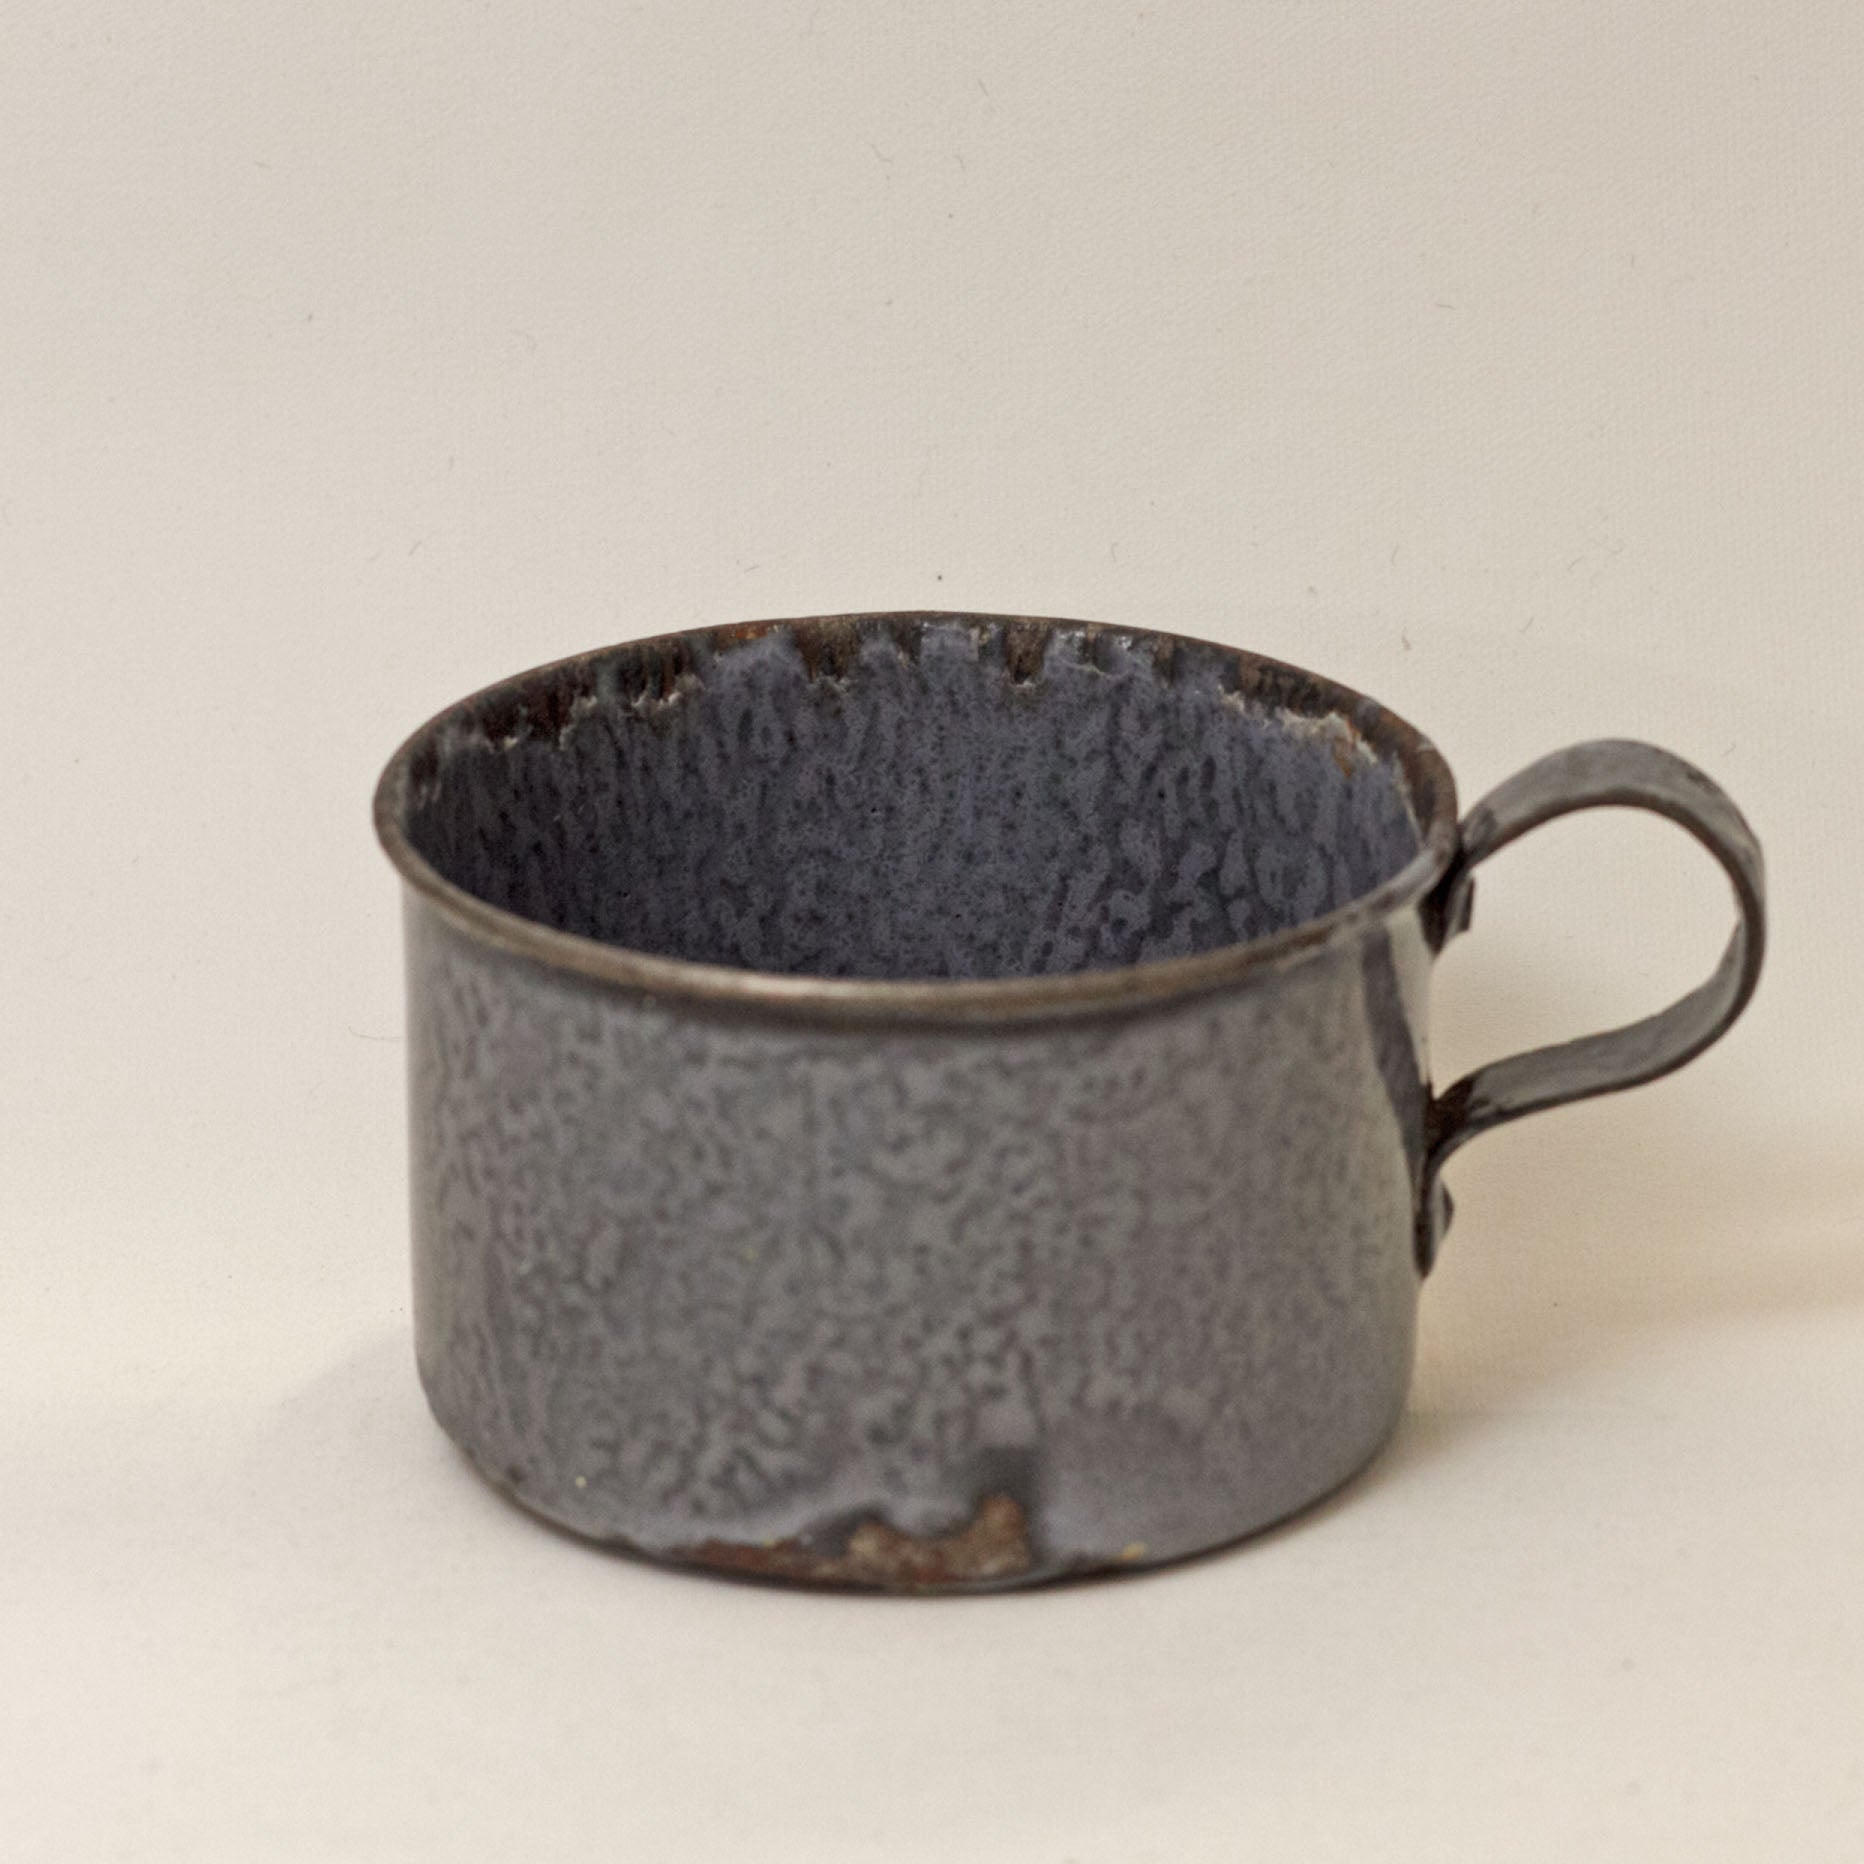 GRANITE WARE CHILD'S CUP with Mottled Gray Enamel